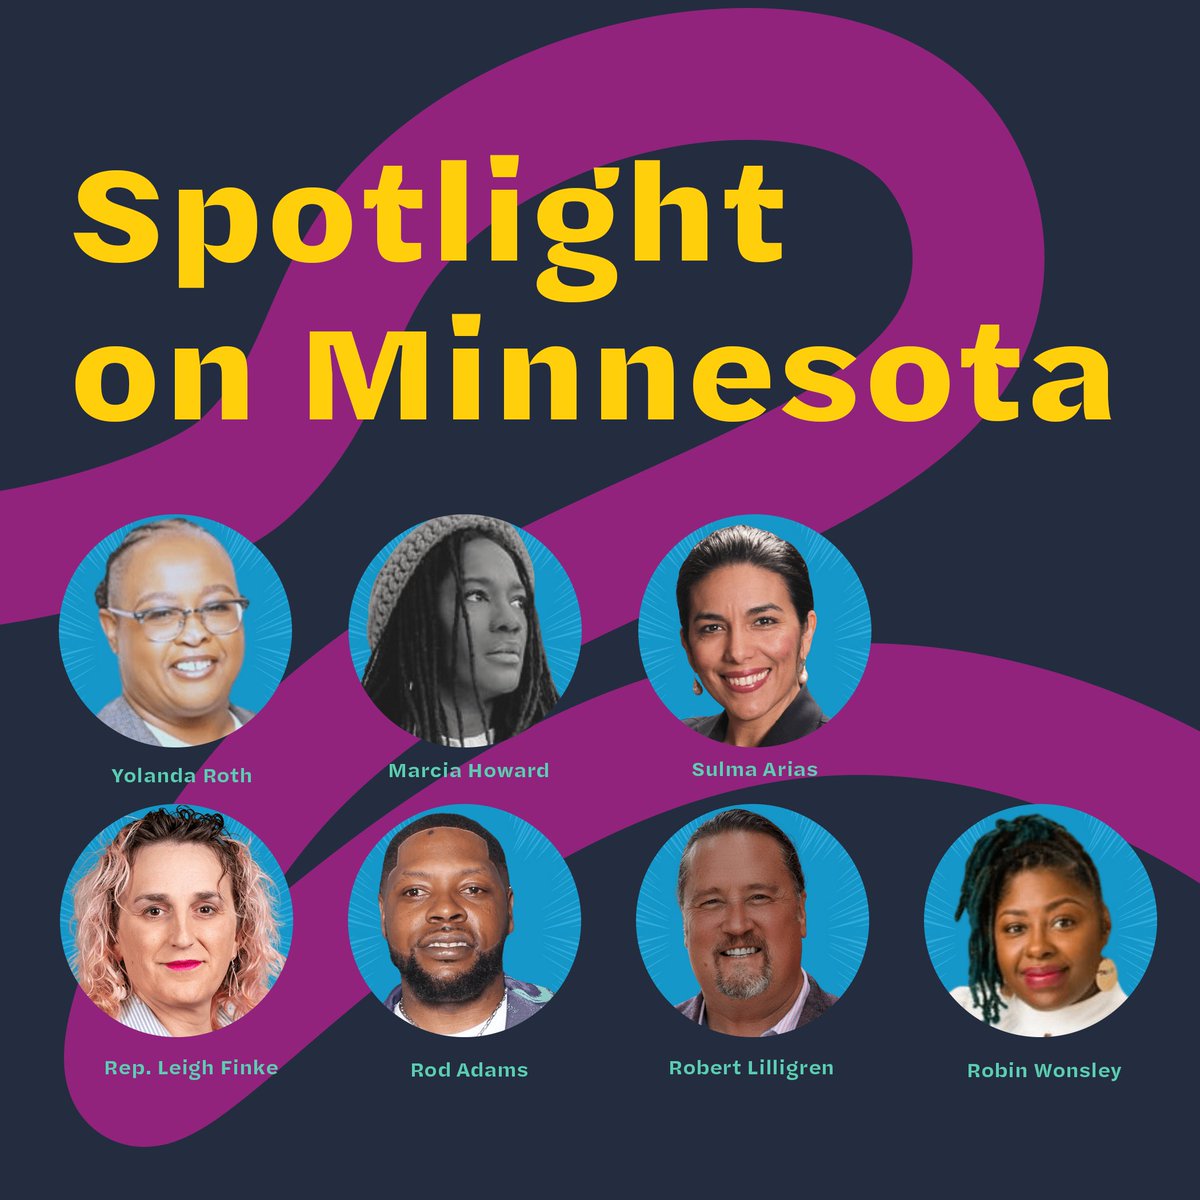 Hear from Minnesota organizers and leaders this SATURDAY as they discuss their campaigns to transform the state! Learn more at buff.ly/3XBw93w. #22CI #22CI2023